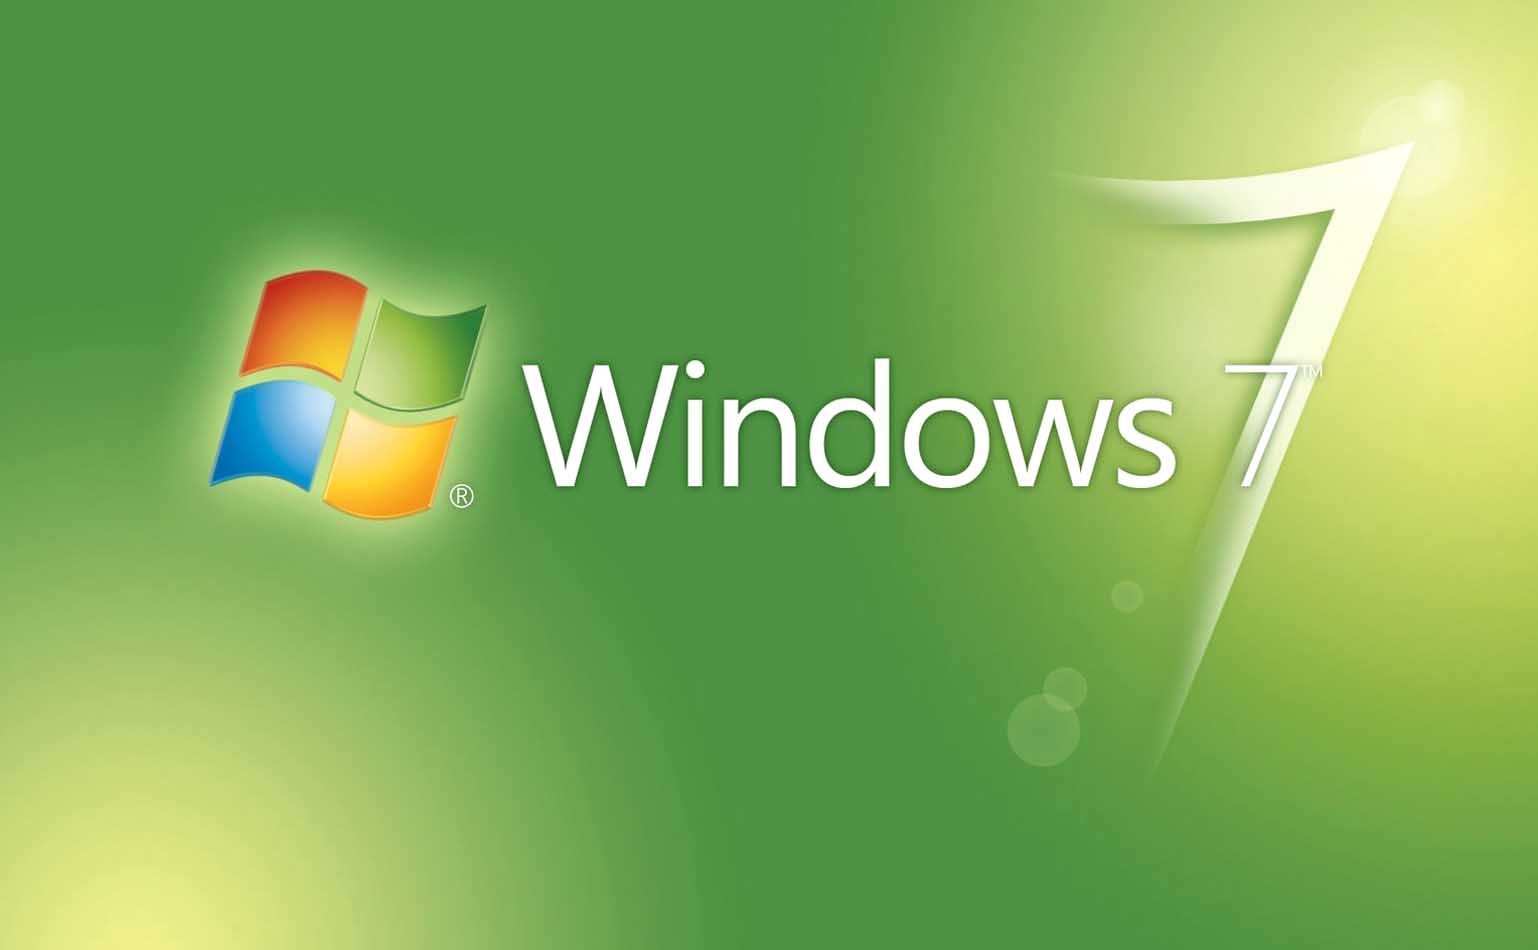 Windows 7 Ultimate Wallpapers Free Download Group - Laptop Wallpapers For Windows  7 Free Download - 1538x950 Wallpaper 